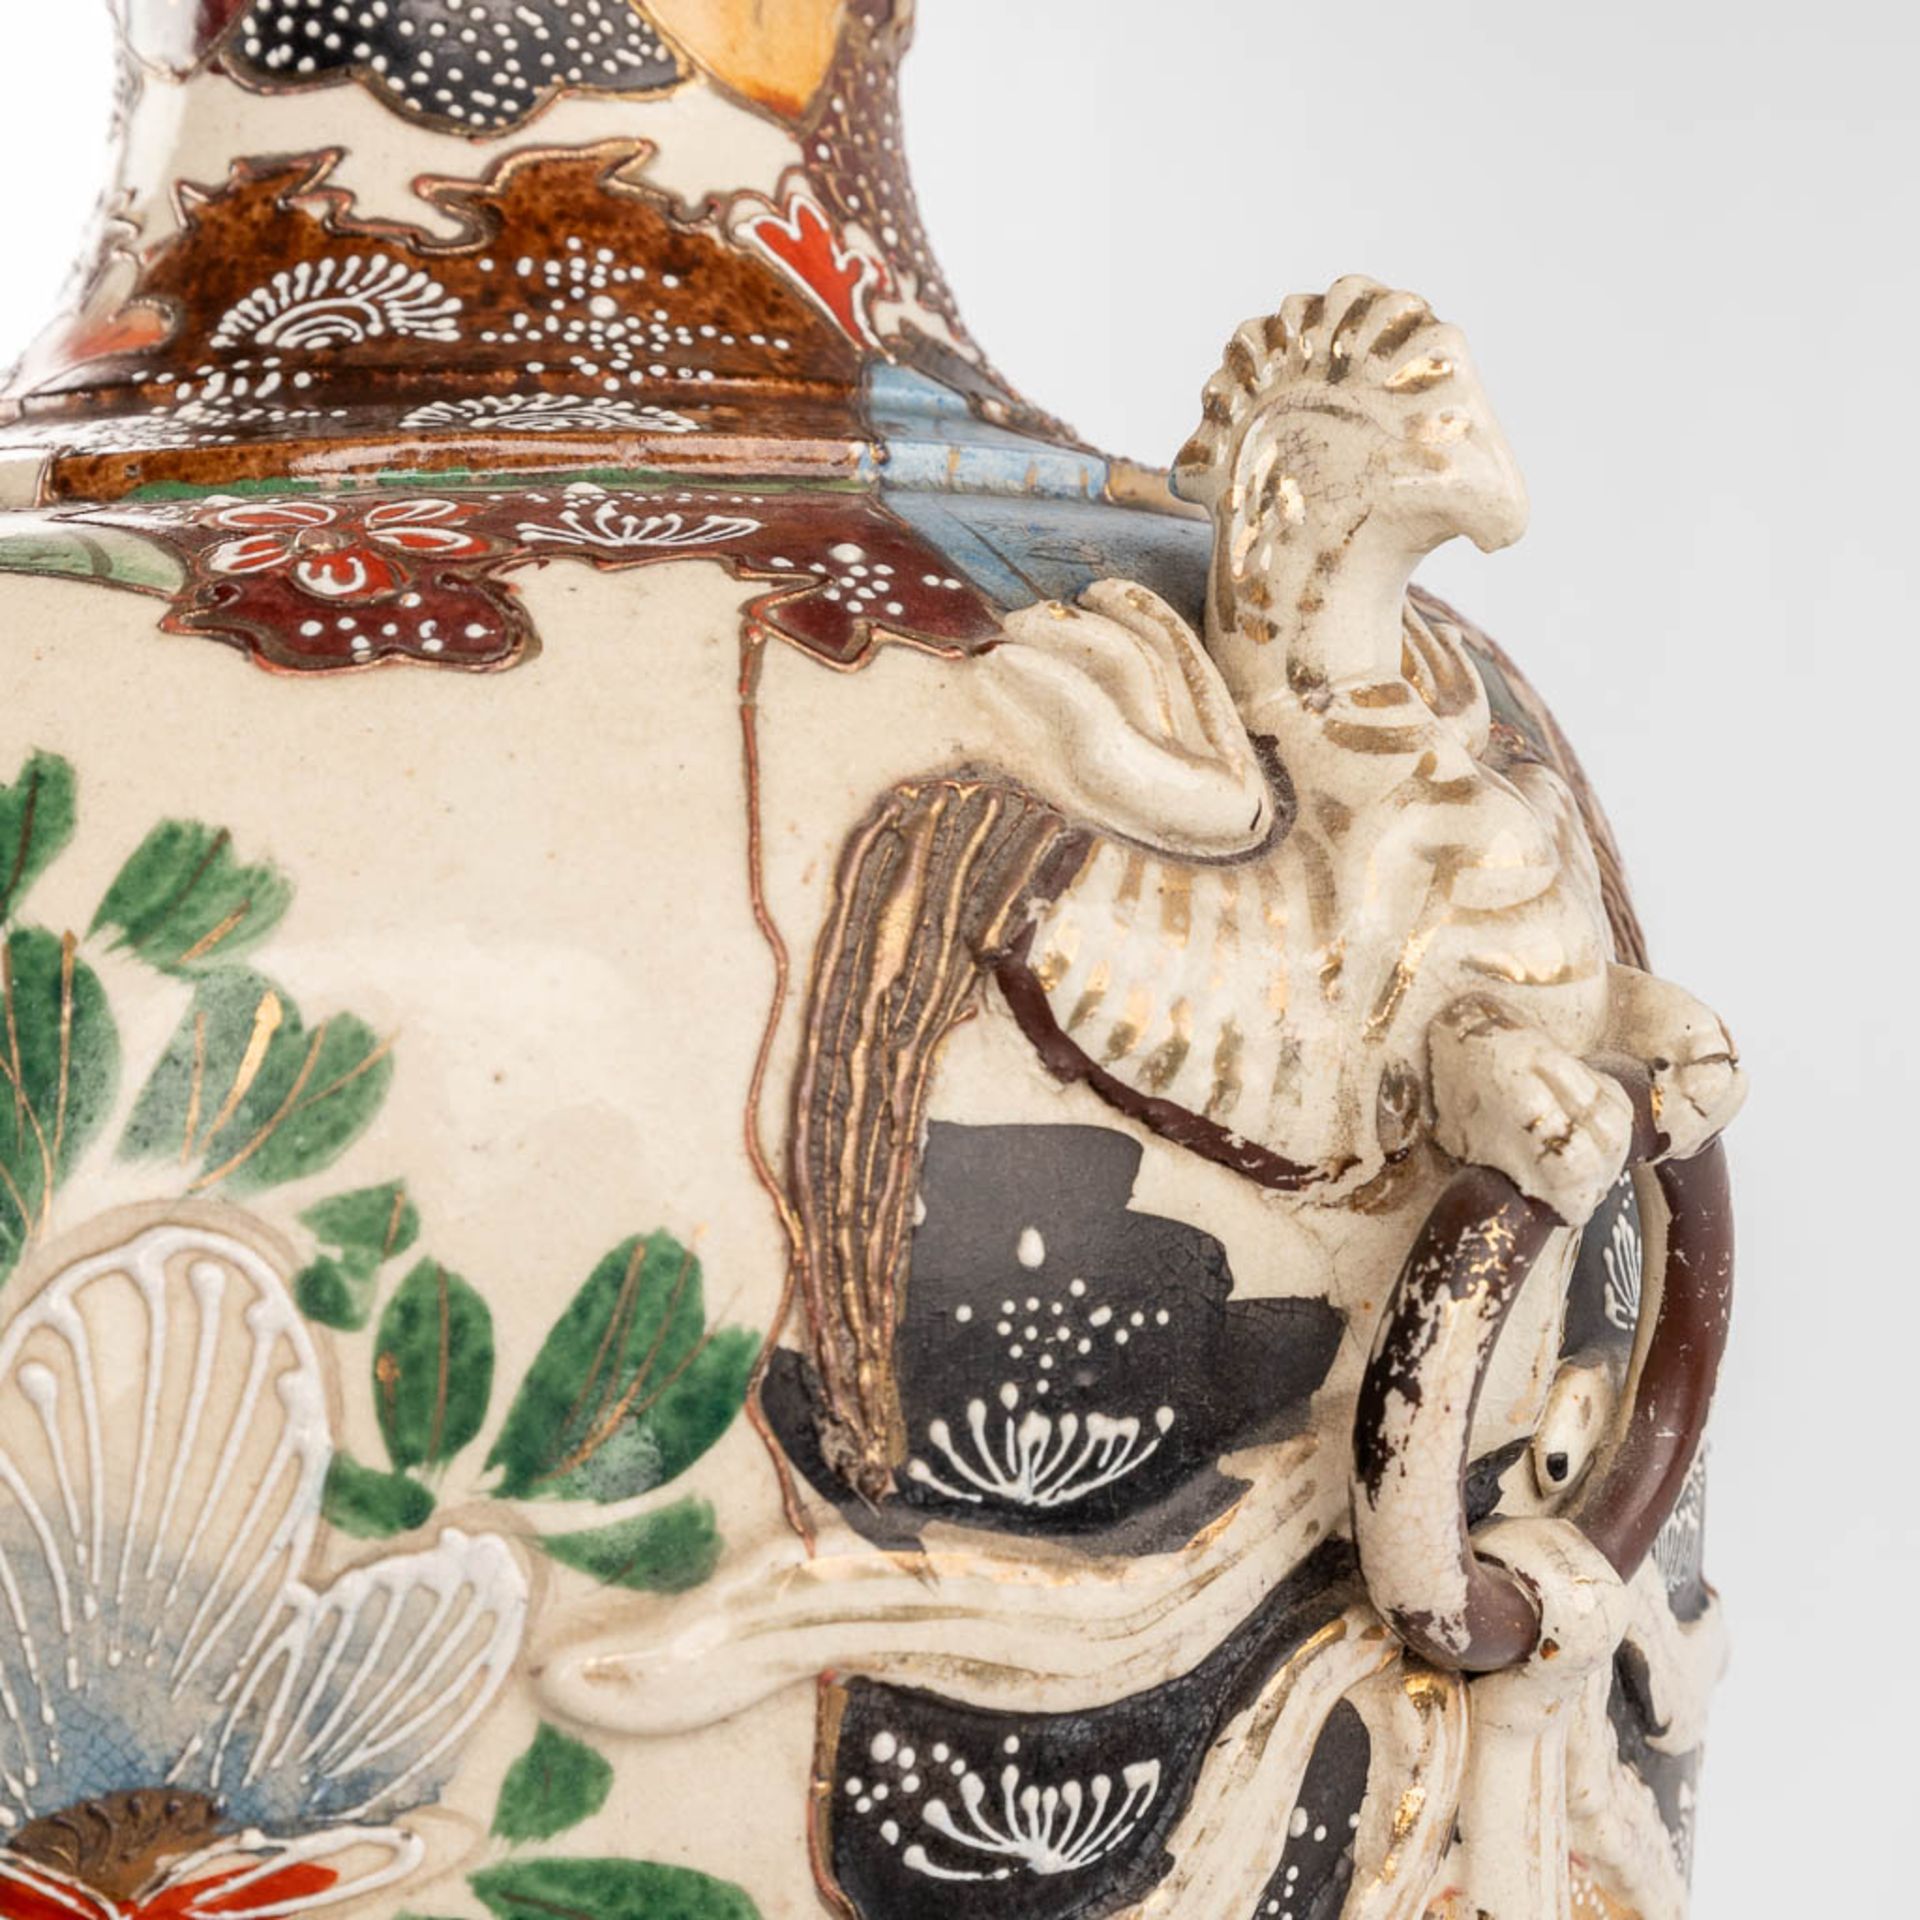 A large and decorative Japanese Satsuma vase. 20th C. (H:80 x D:32 cm) - Image 11 of 16